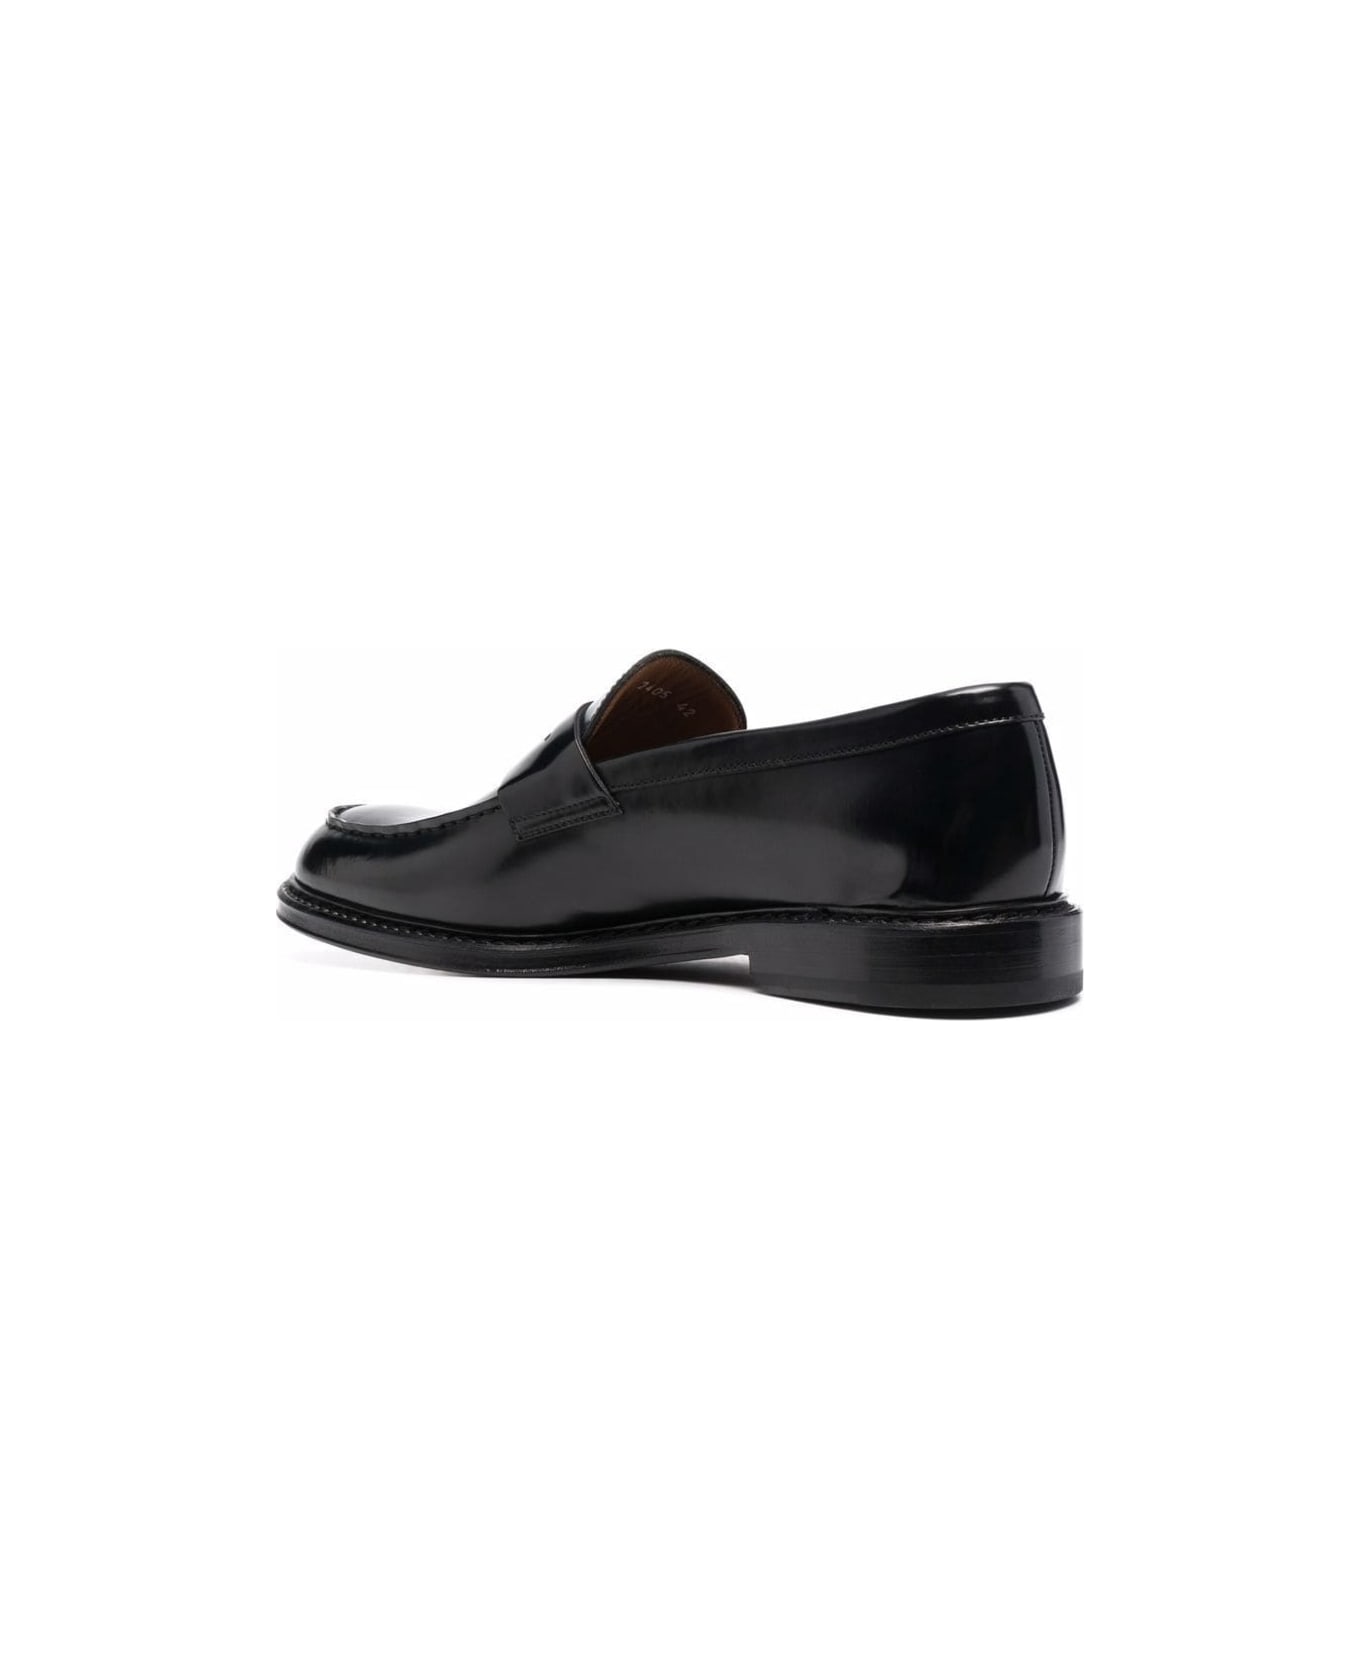 Doucal's Black Slip-on Loafers With Round Toe In Patent Leather Man - Nero ローファー＆デッキシューズ